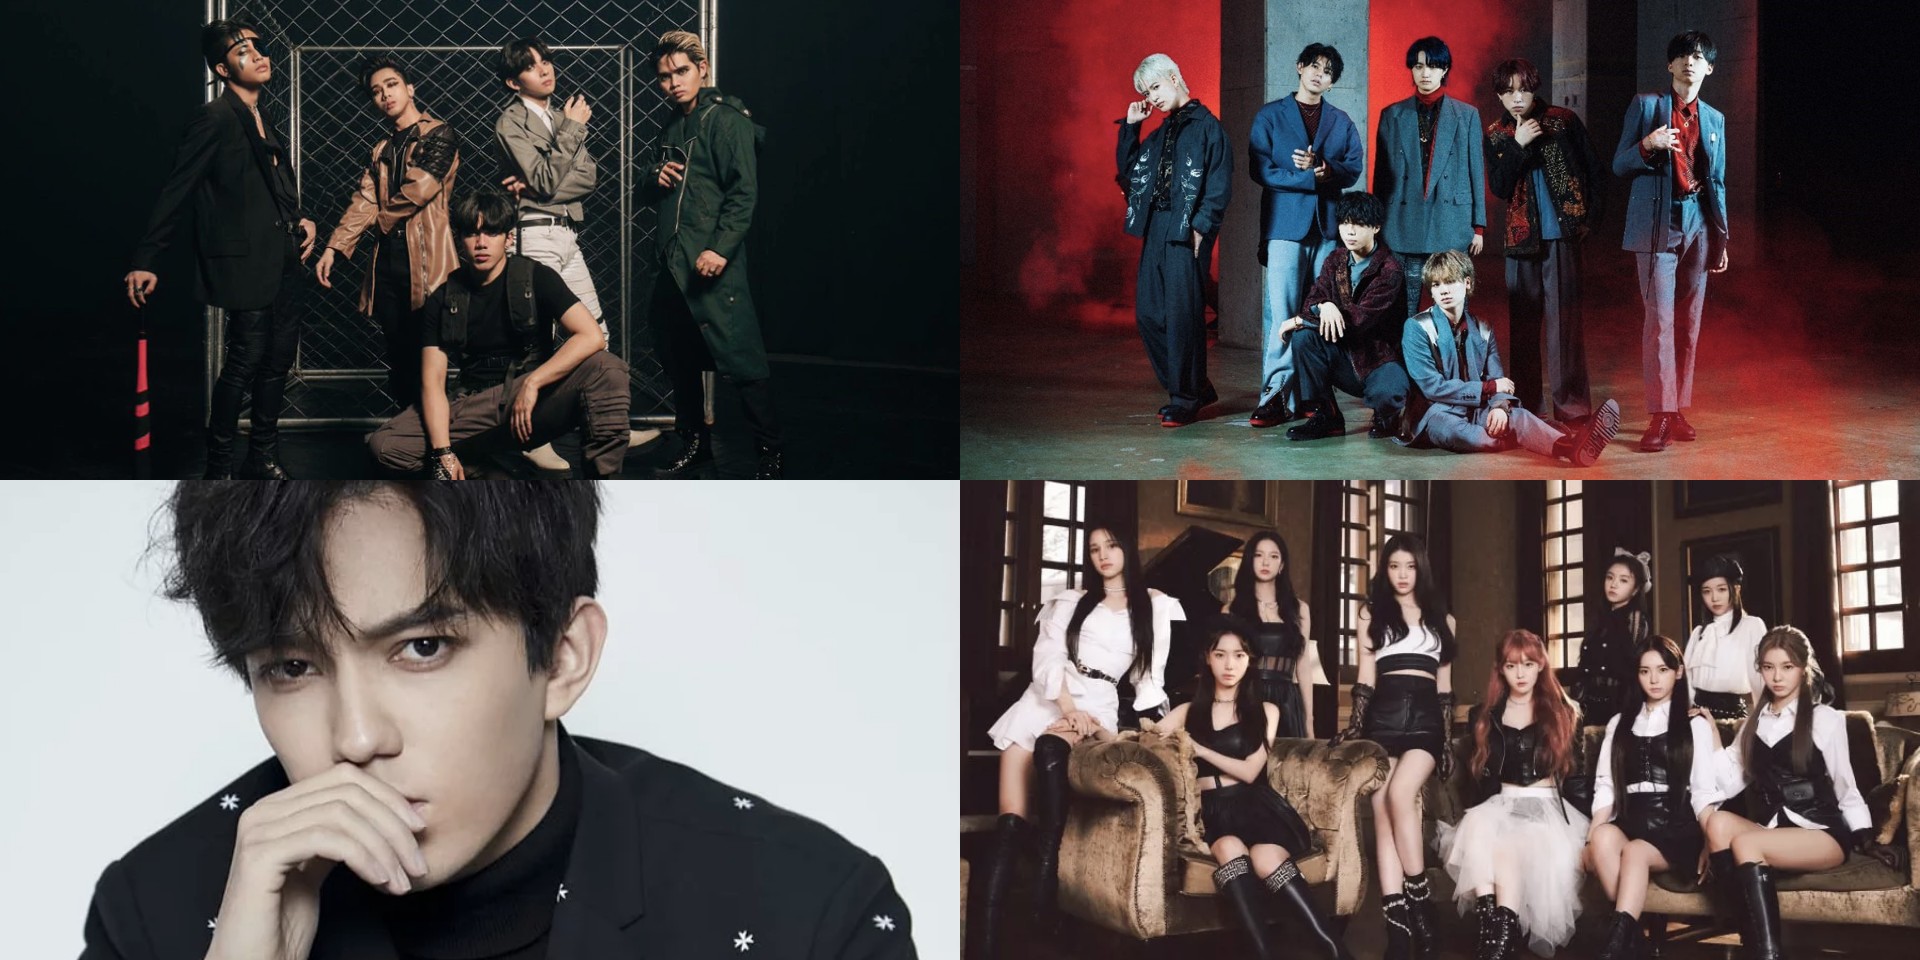 8 songs from Billboard's #HotTrendingSongs chart you need to check out: SB19, Dimash Qudaibergen, Kep1er, BE:FIRST, and more